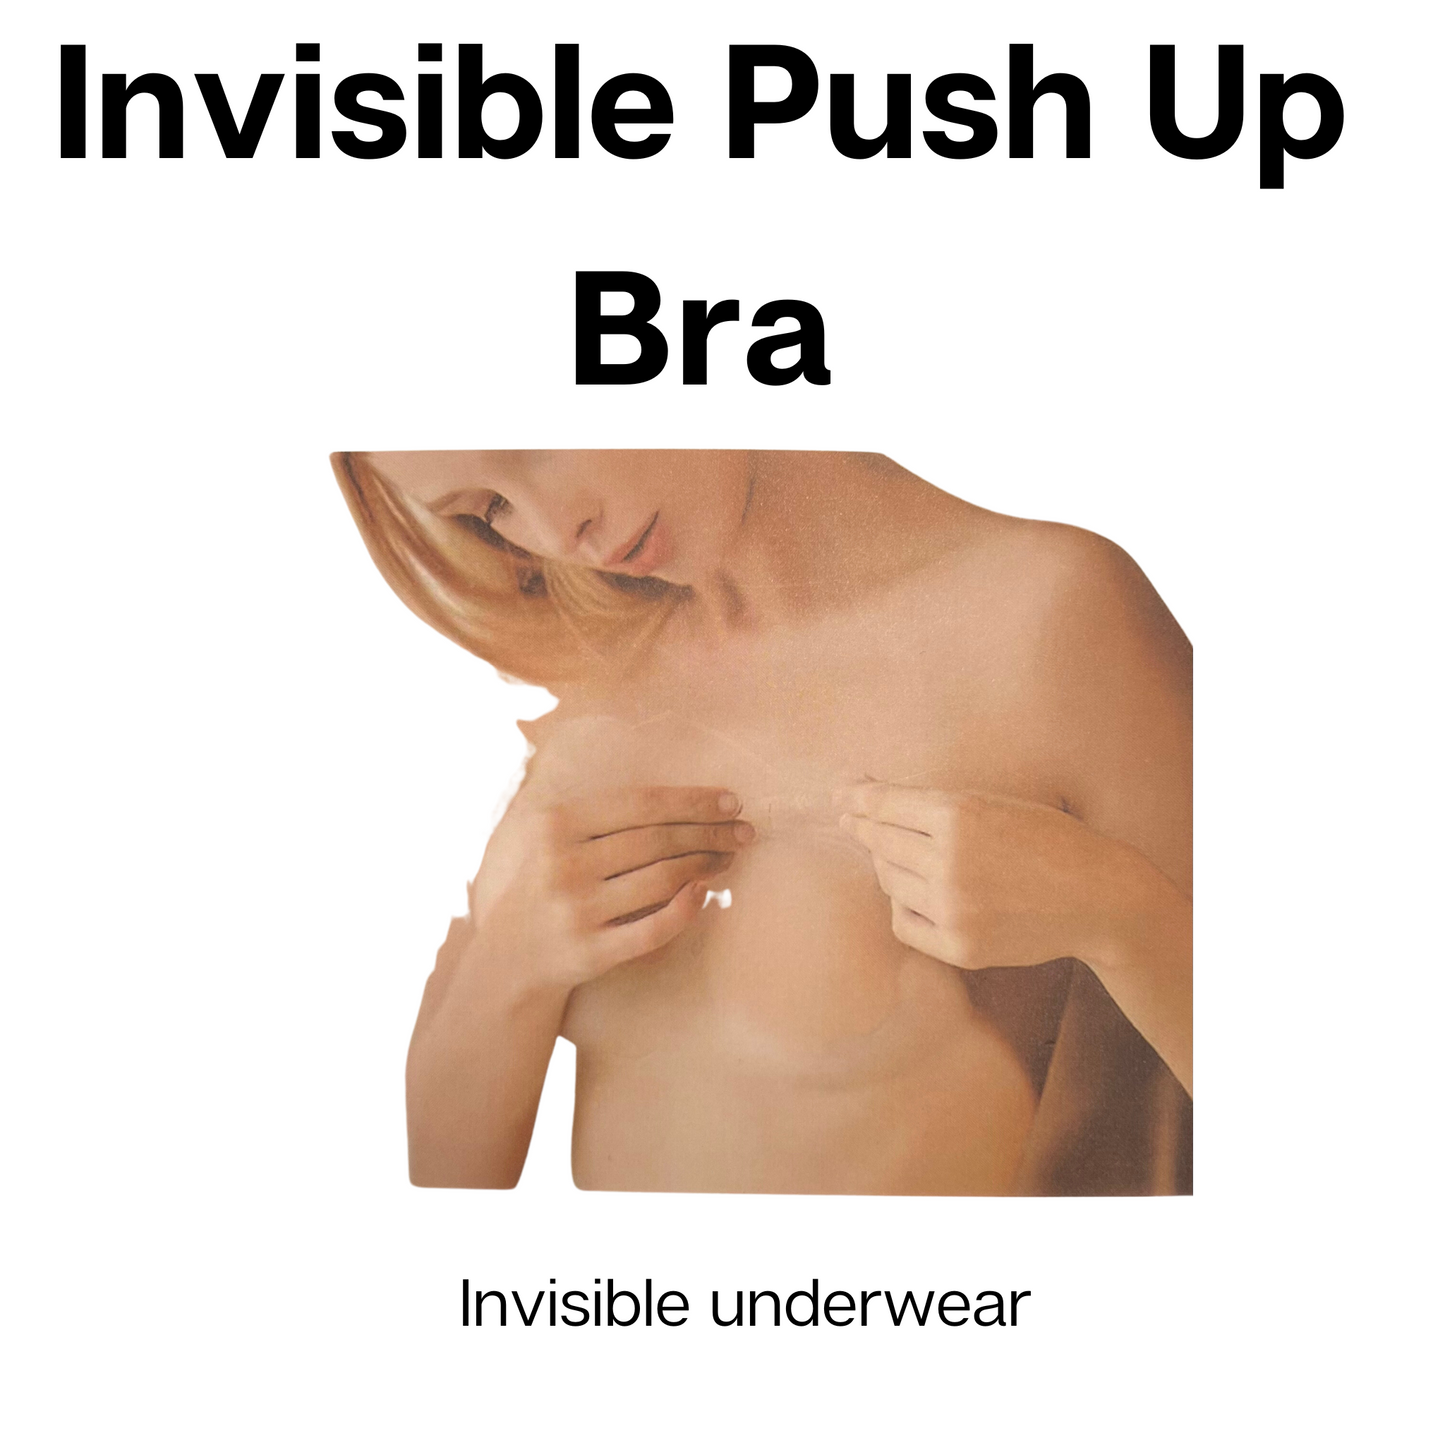 adhesive push up bra in nude color